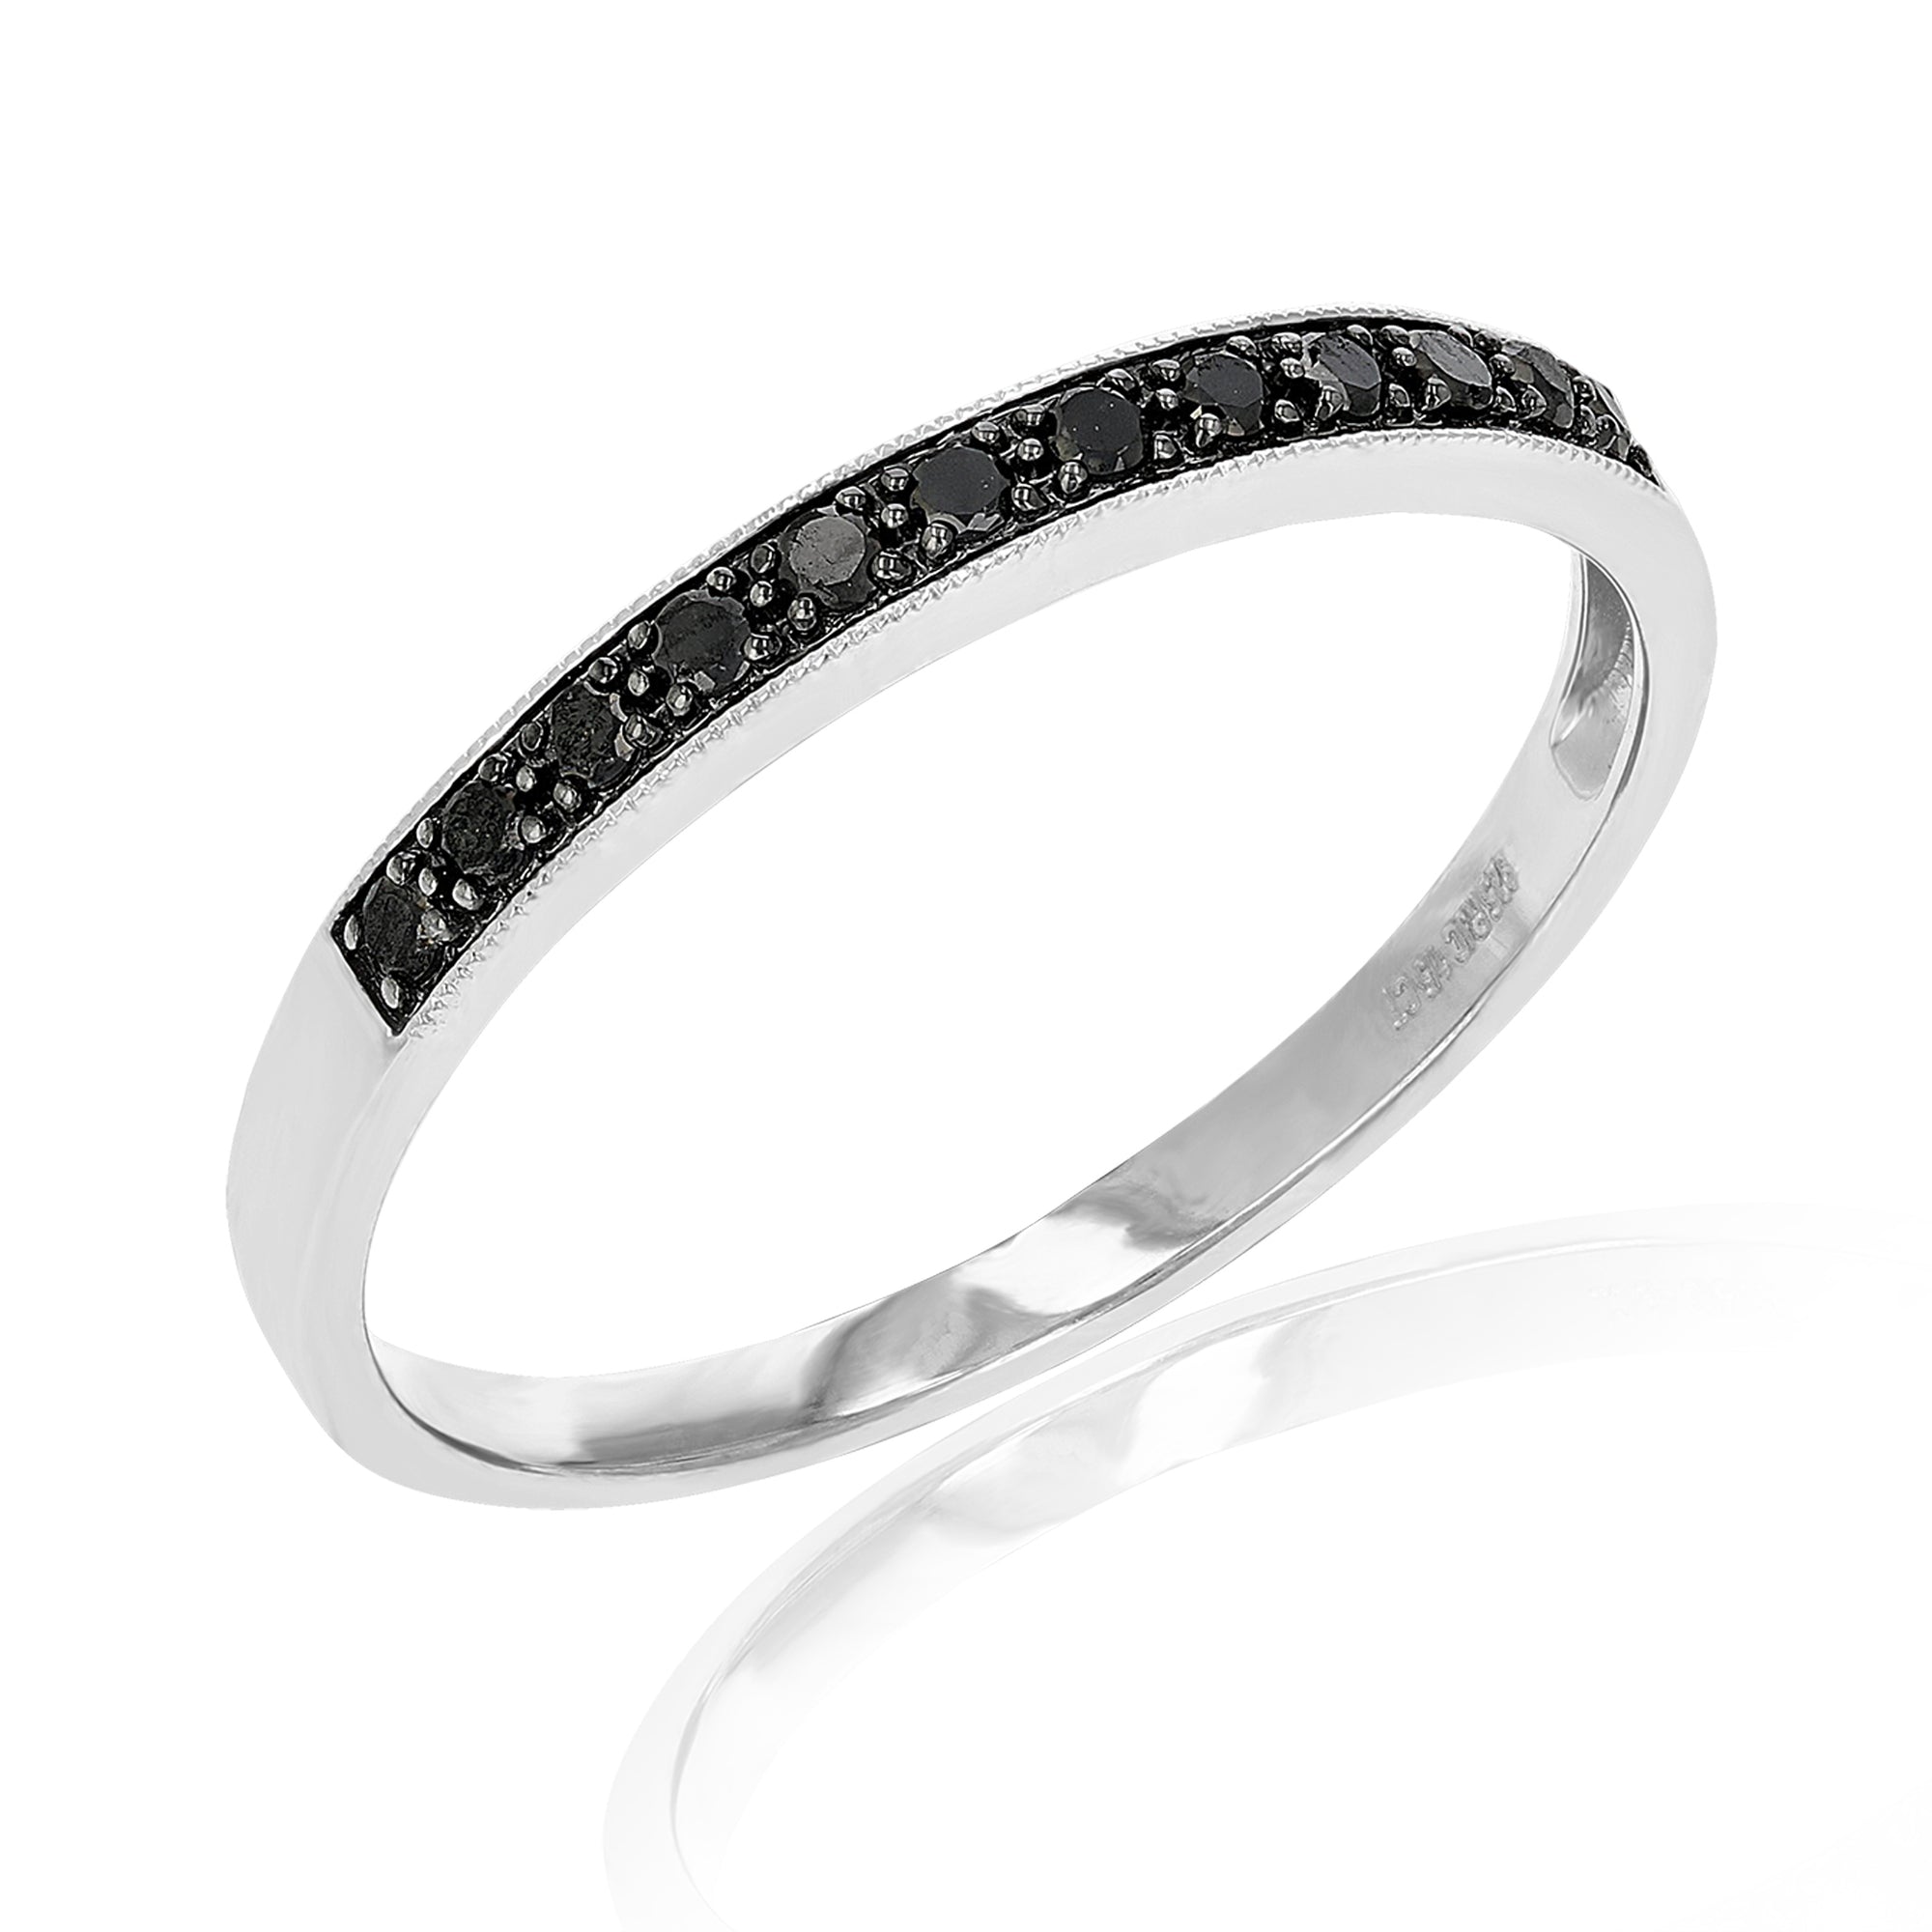 1/5 cttw Black Diamond Wedding Band in .925 Sterling Silver with Milgrain